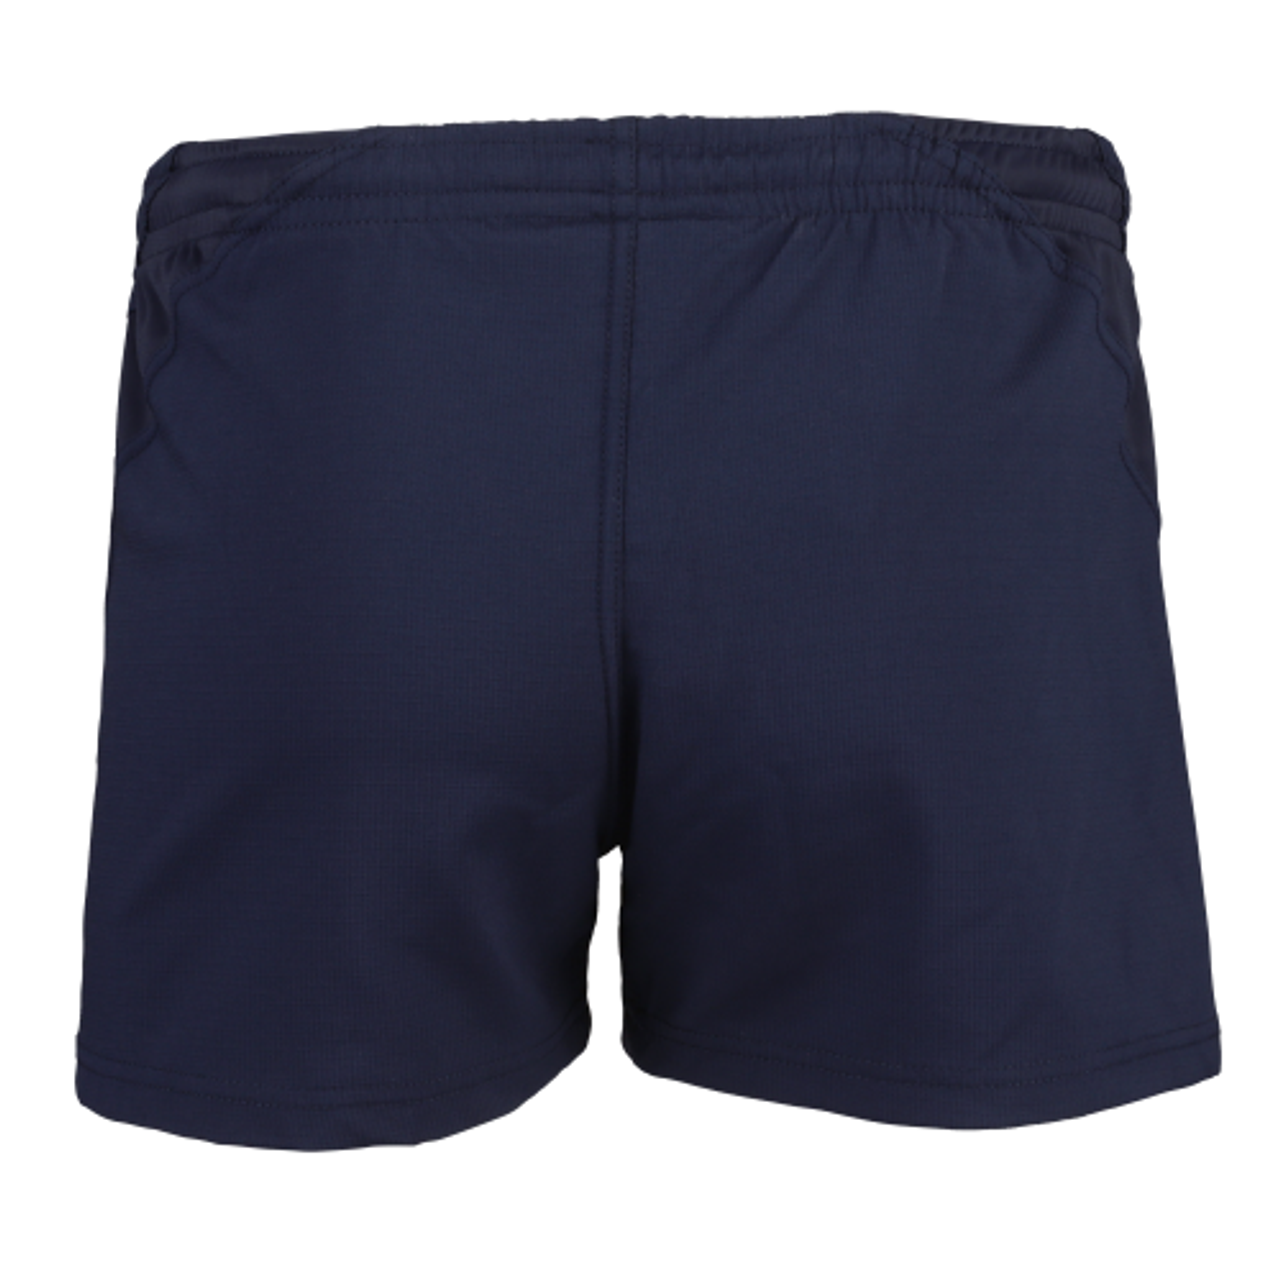 SRS Ladies-Cut Performance Rugby Shorts, Navy